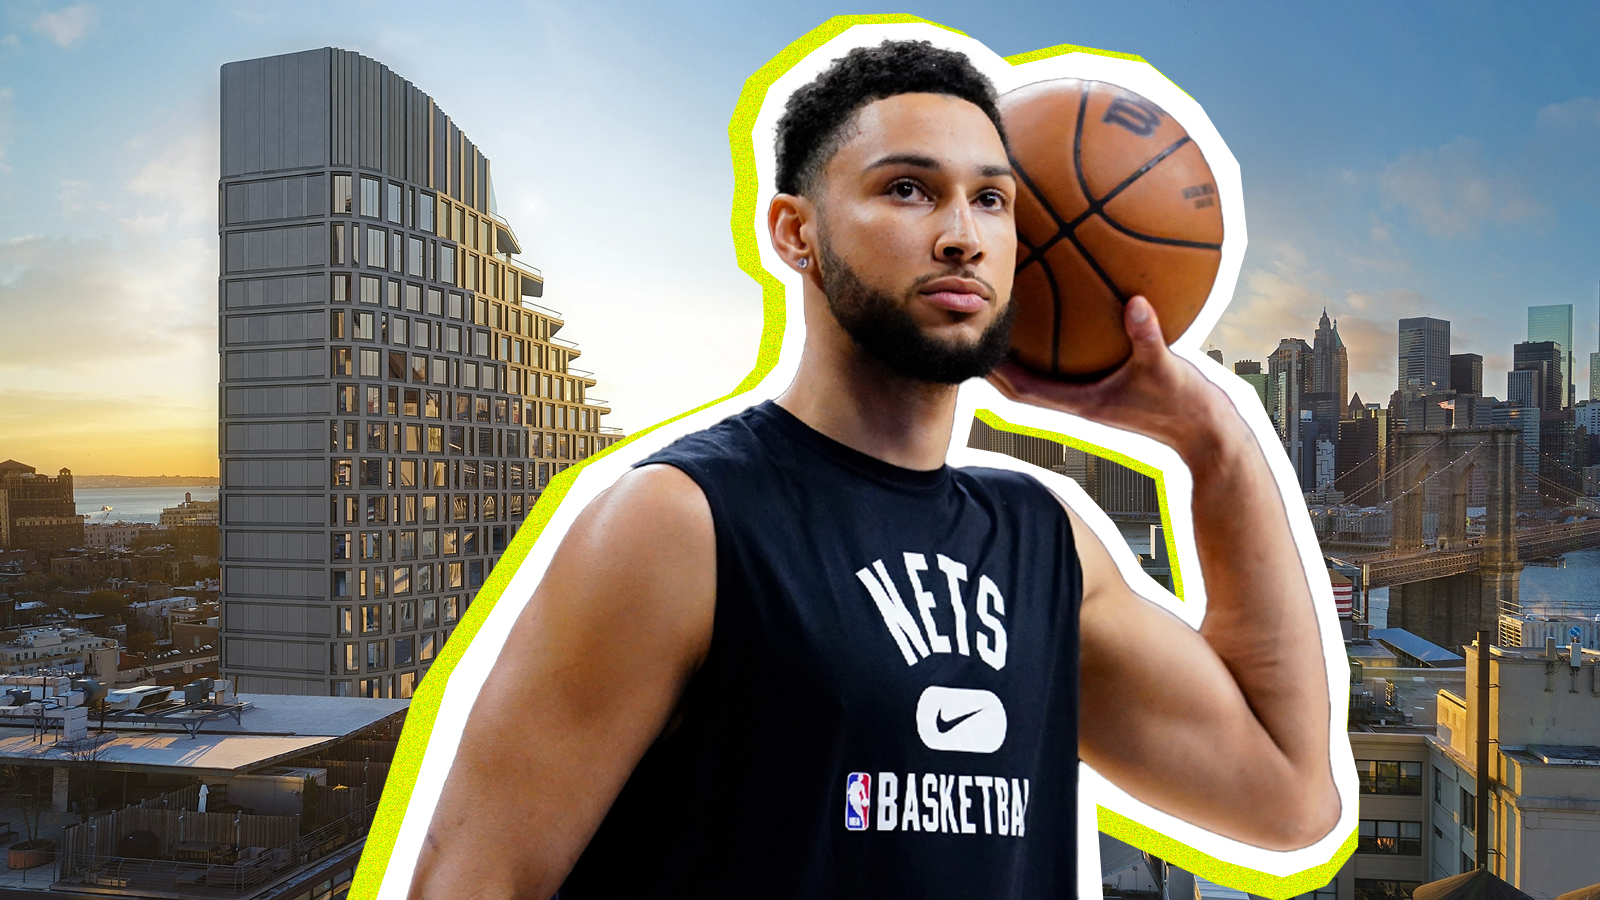 Ben Simmons Buys $20 Million Bachelor Pad Just Weeks After Break-Up